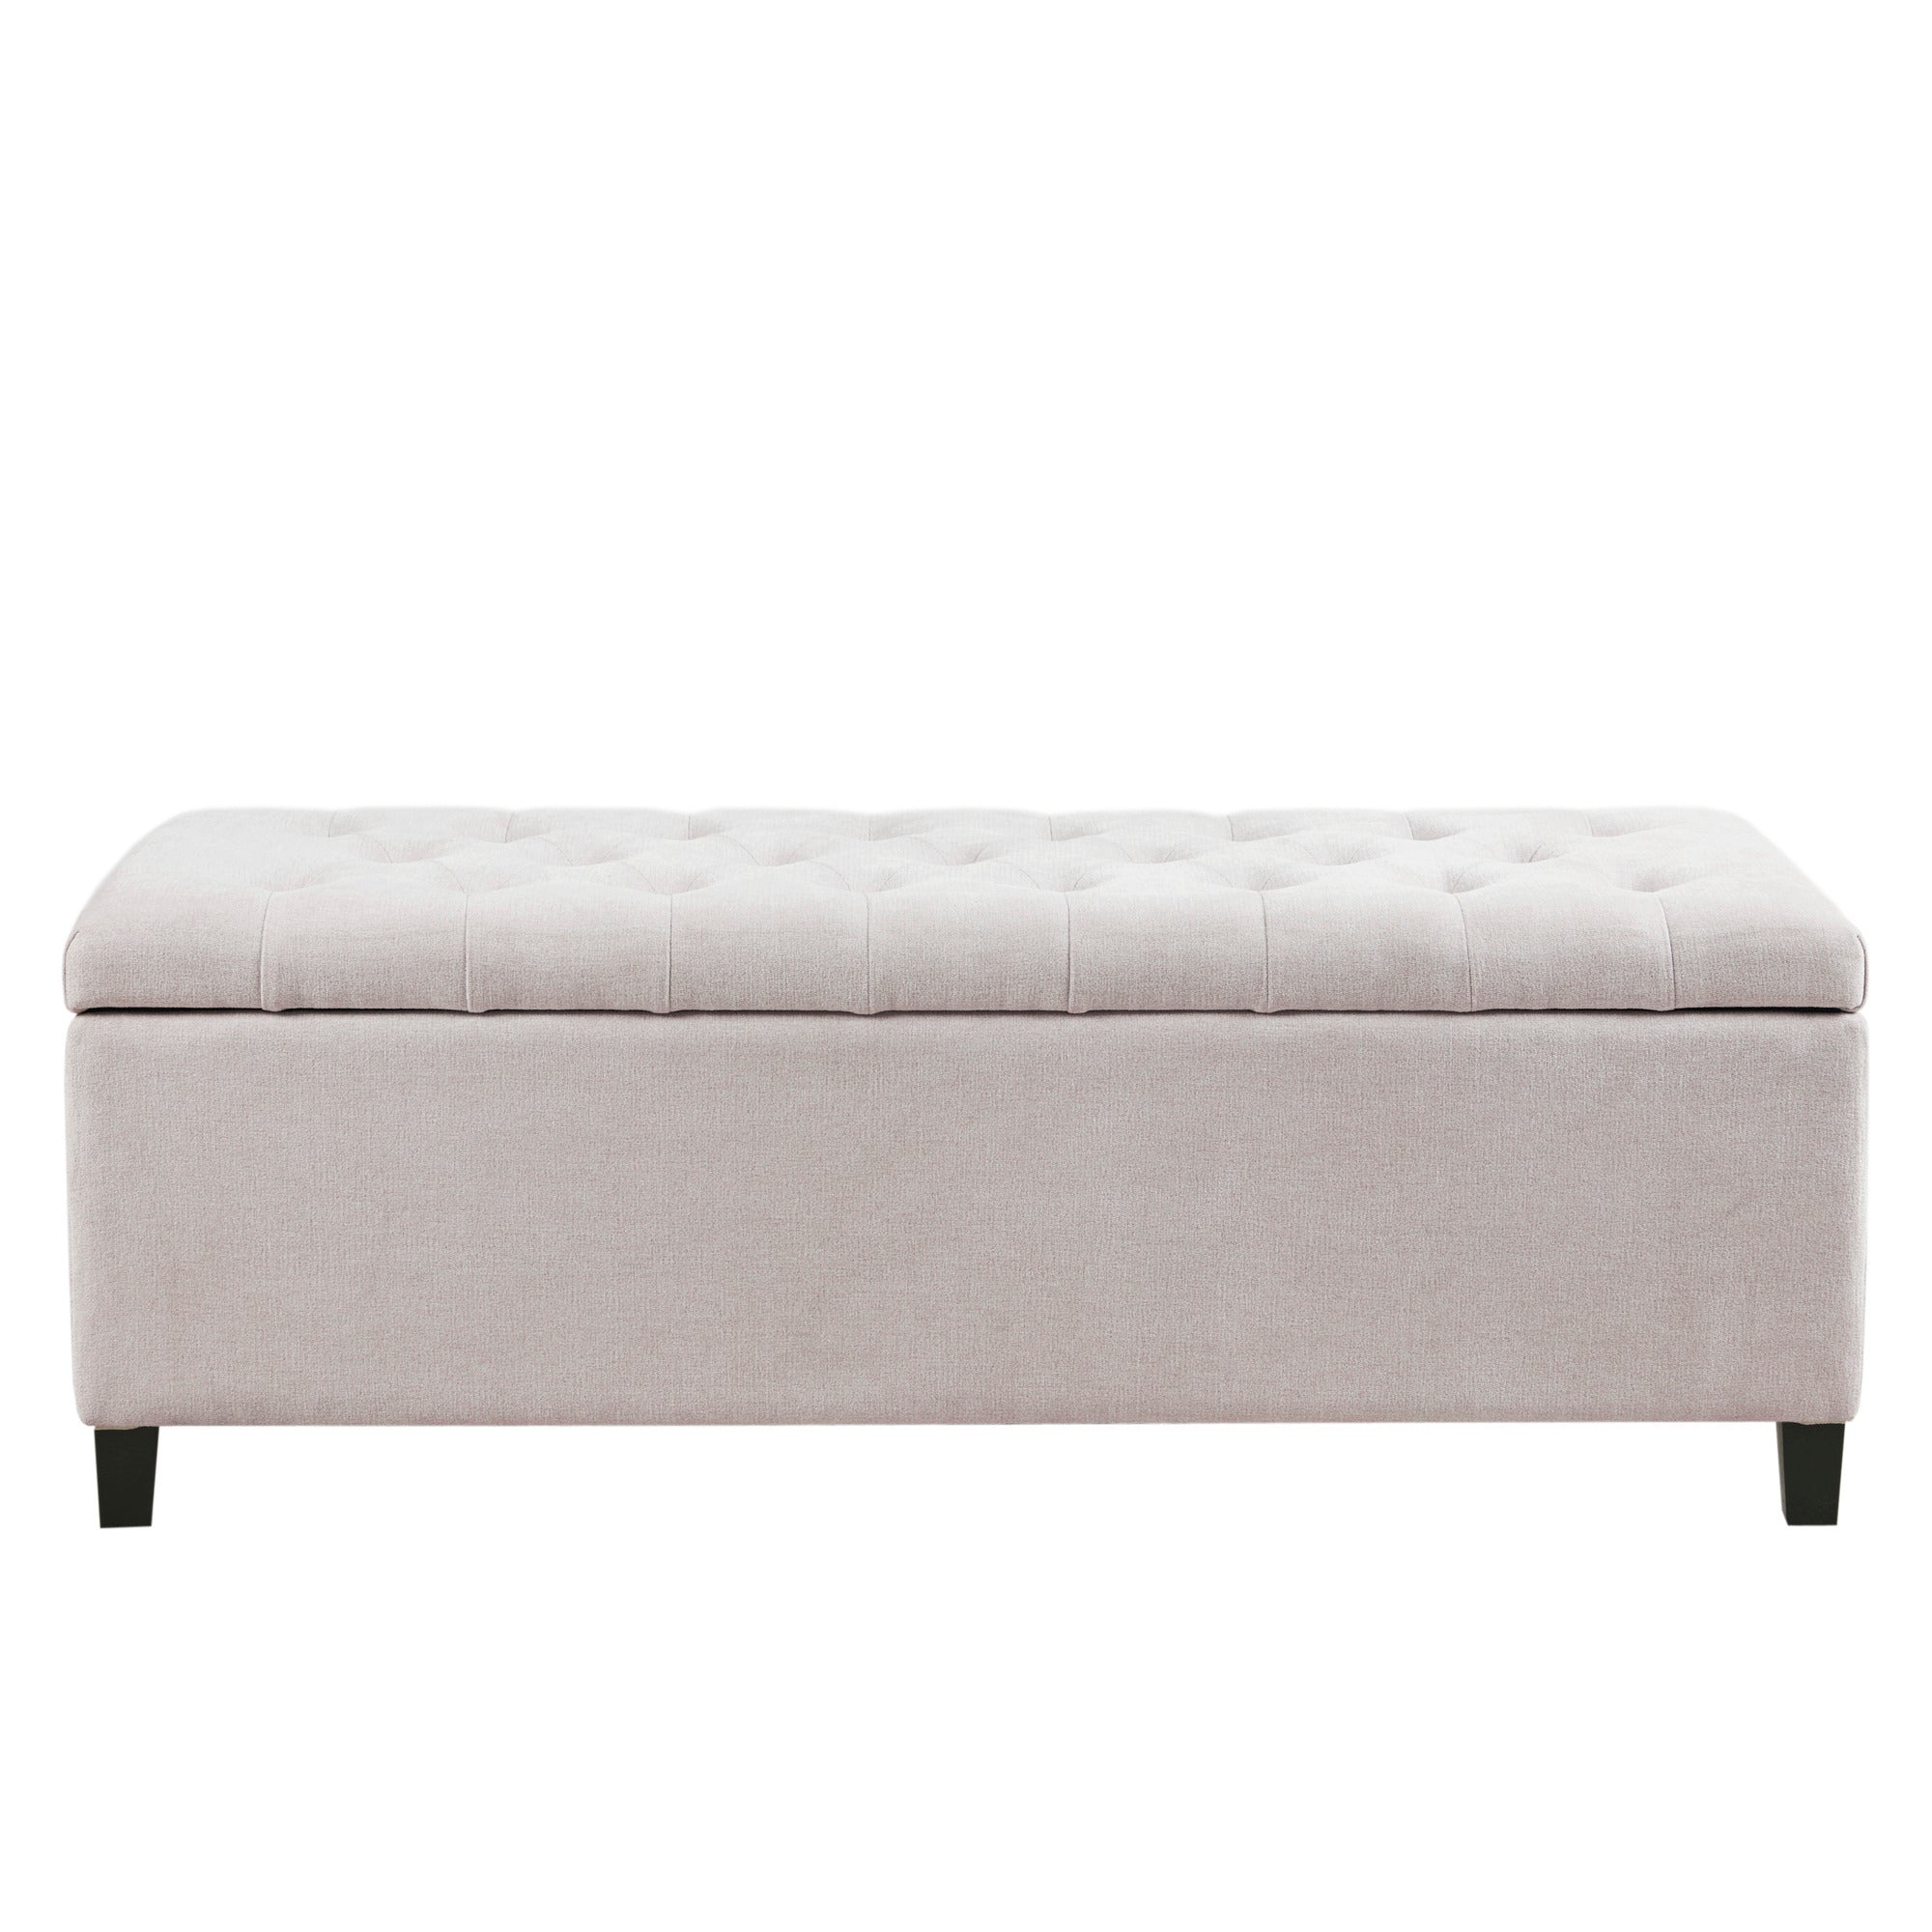 Tufted Top Soft Close Storage Bench natural-polyester